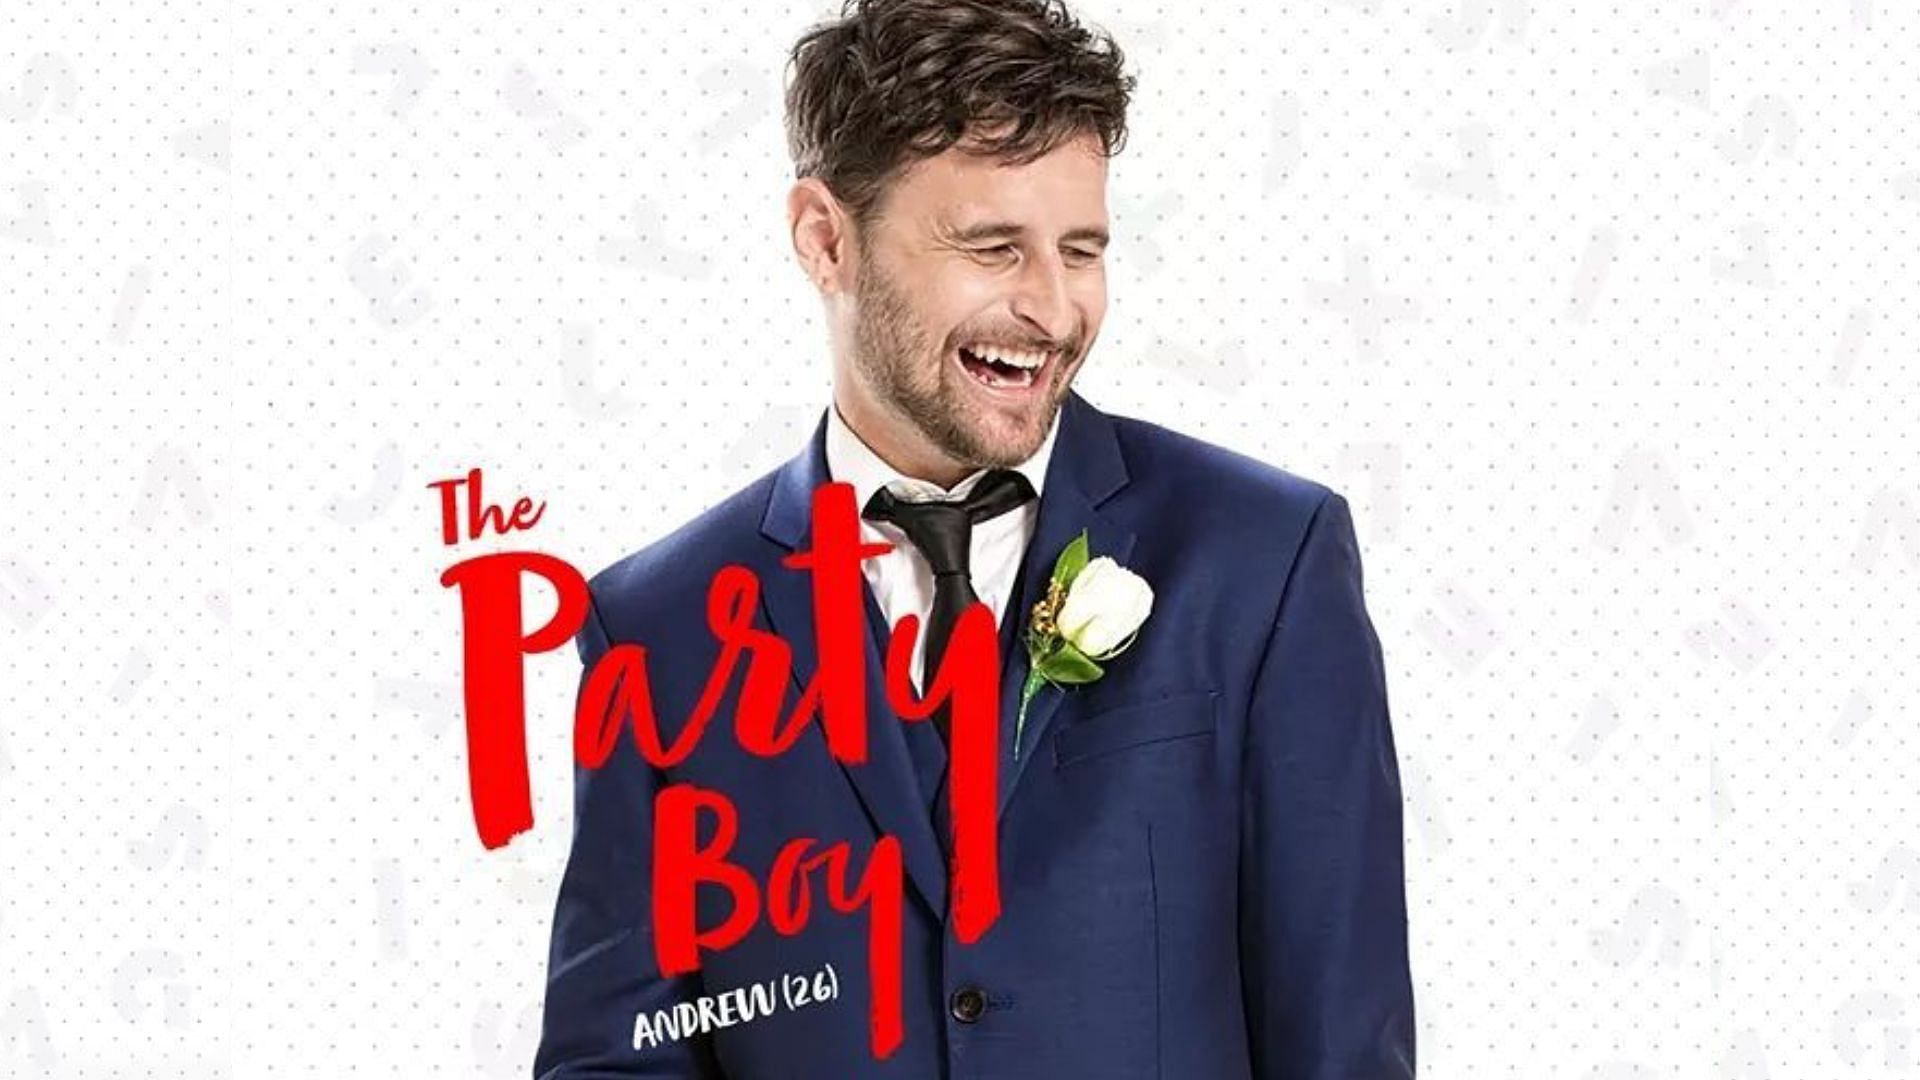 Andrew Jury in Married at First Sight New Zealand (Image via @juryandrew/ Instagram)